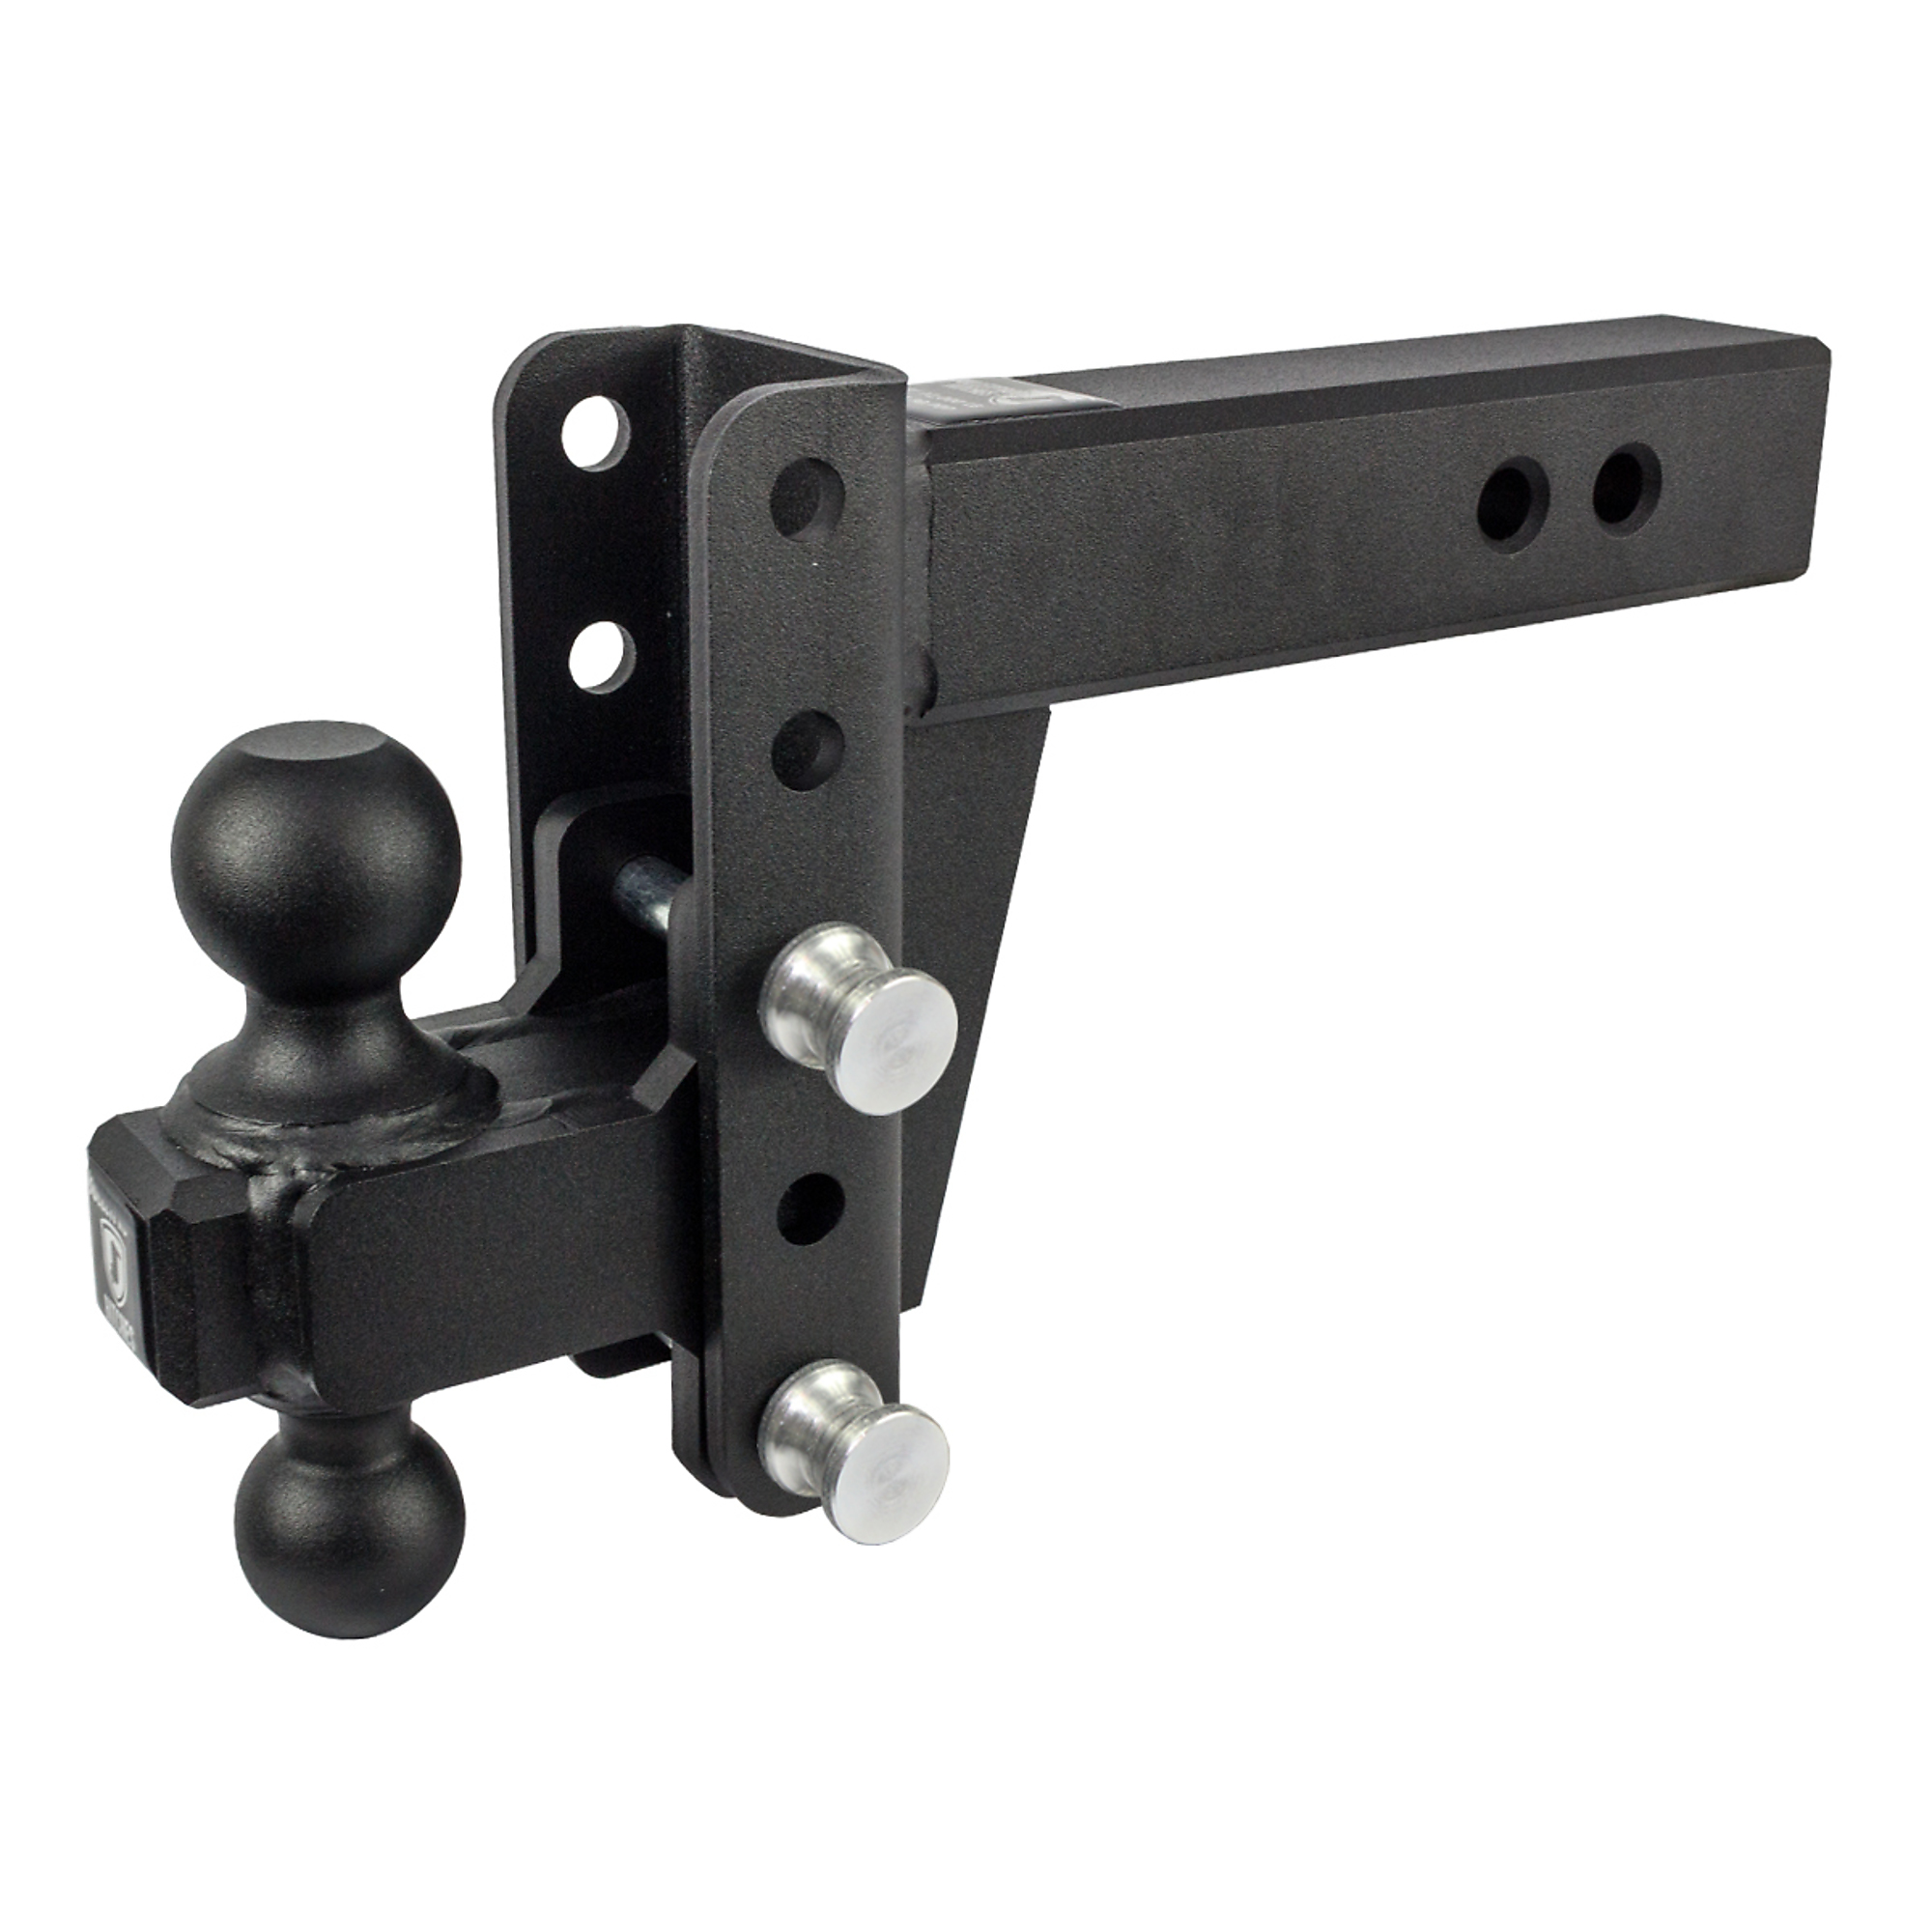 BulletProof Hitches, 2.5Inch EXTREME DUTY 4Inch DROP/RISE HITCH, Model ED254